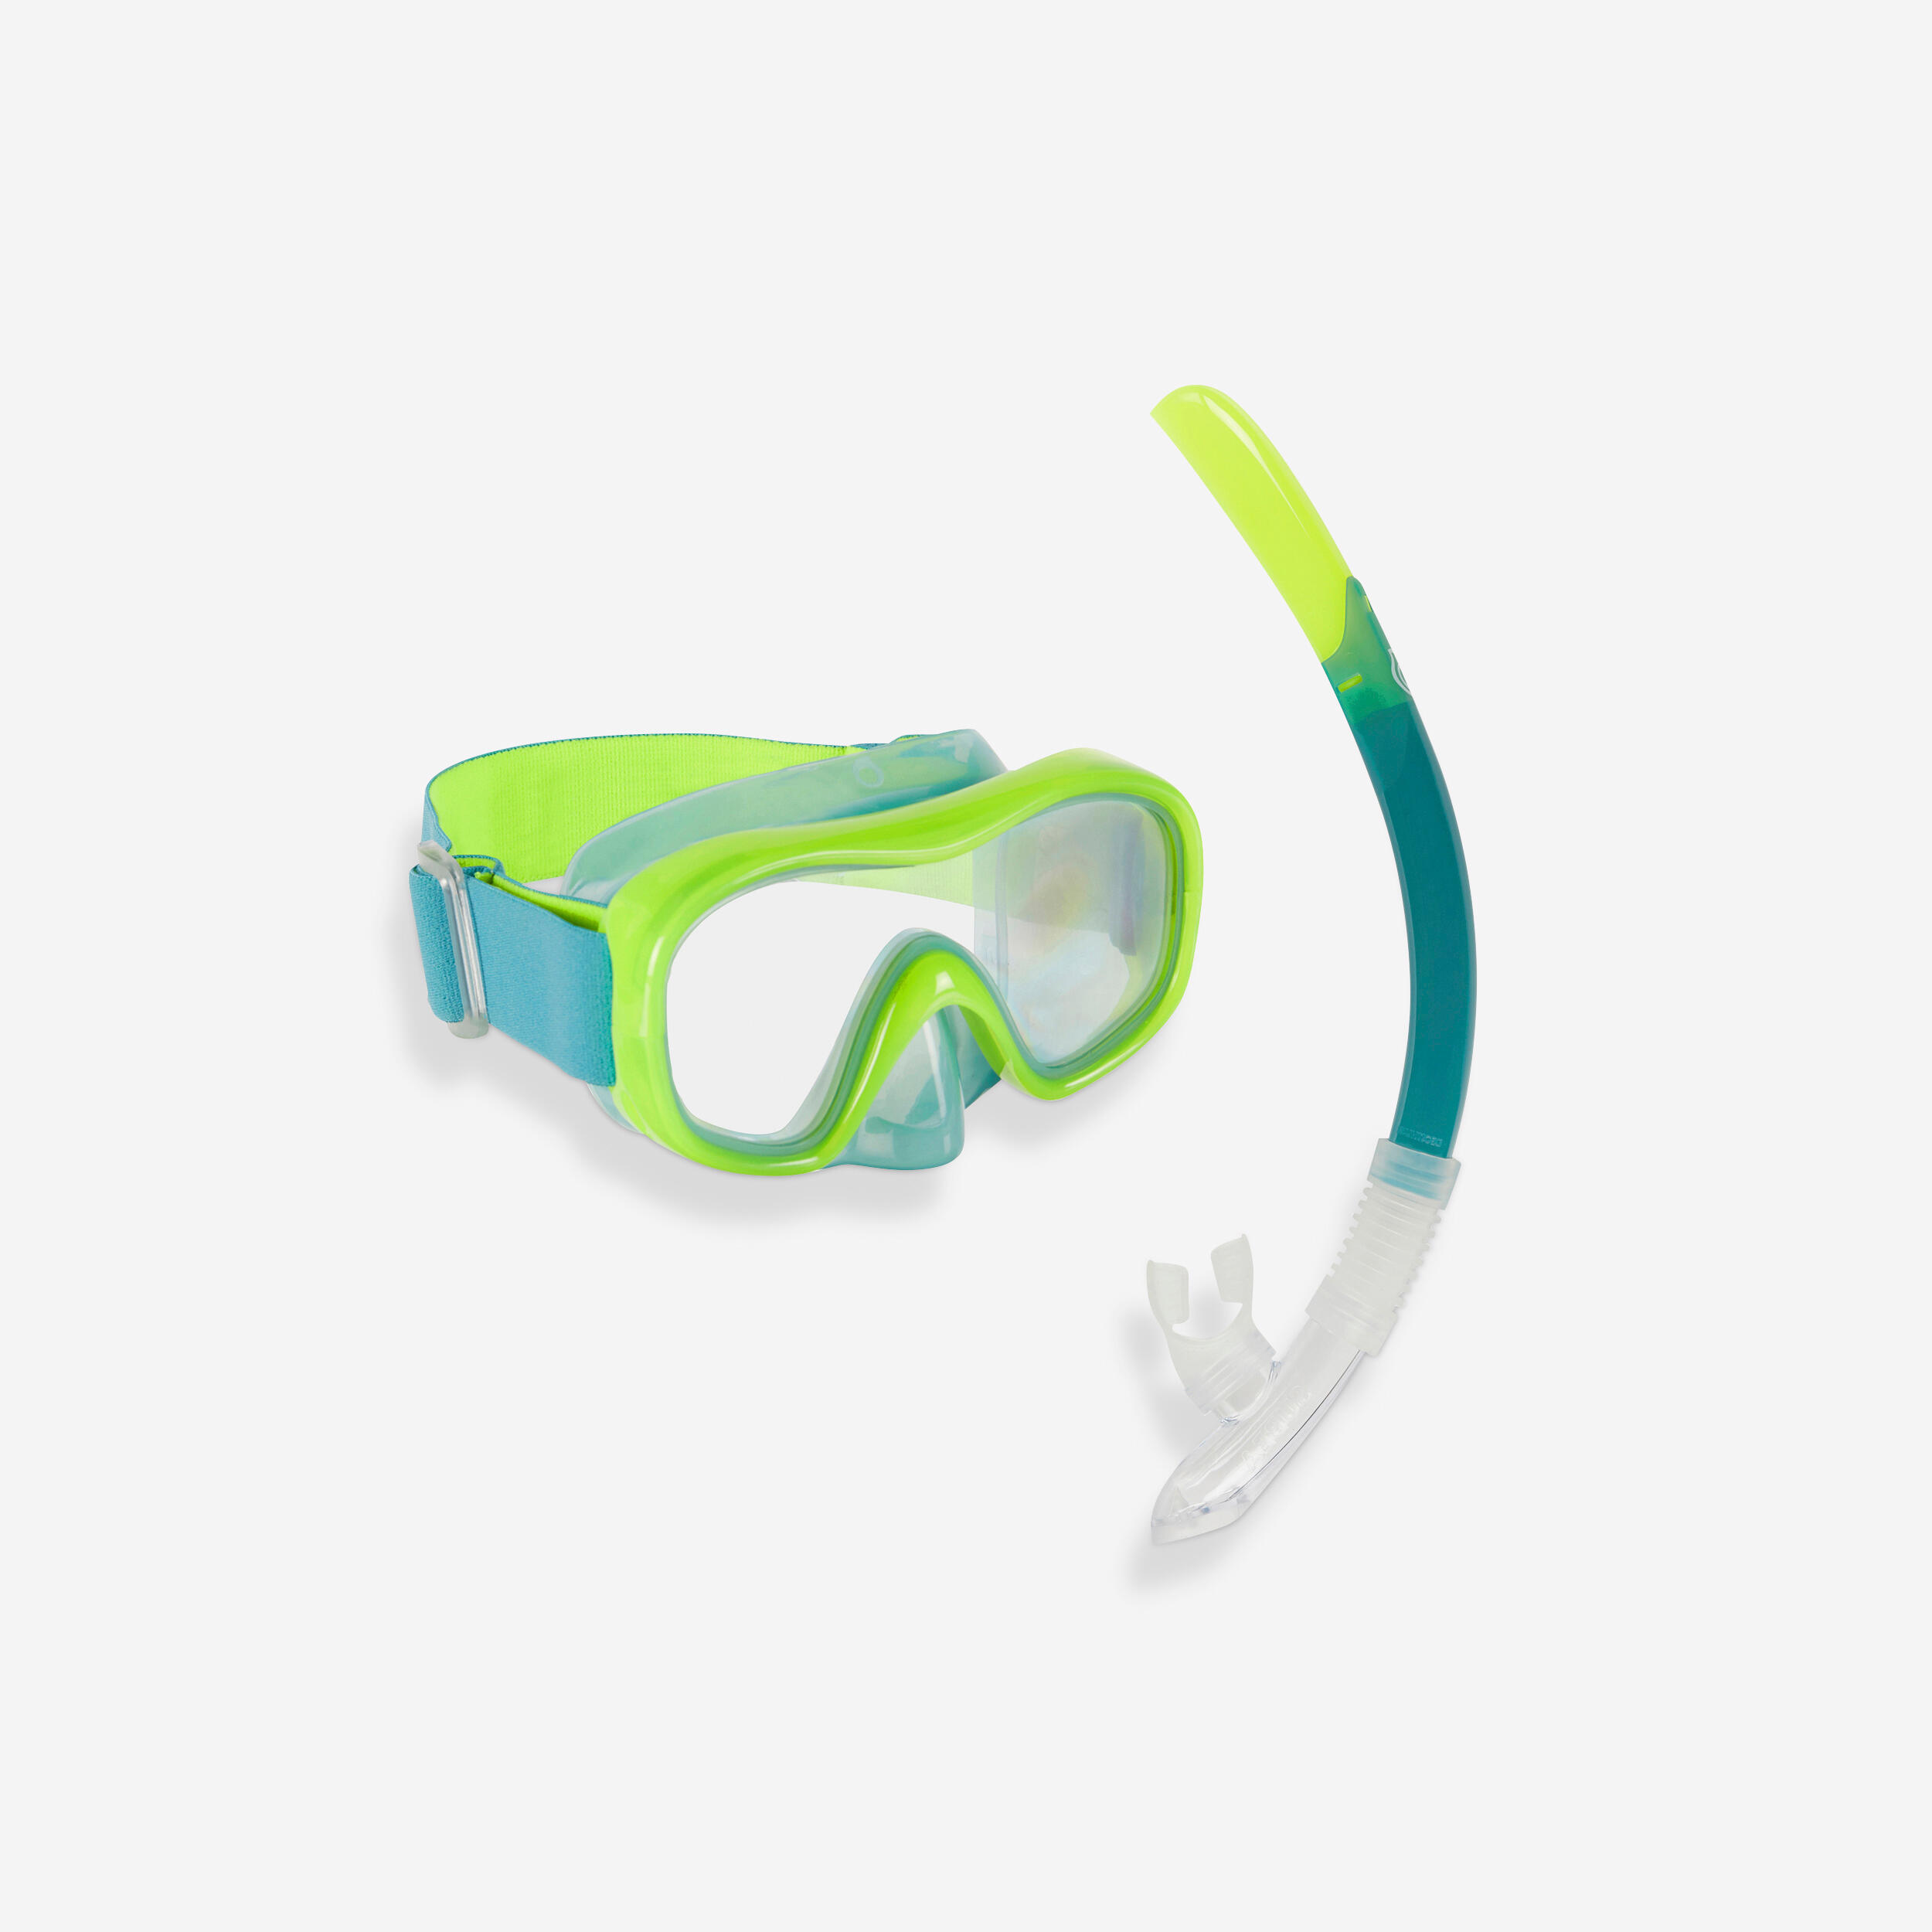 SUBEA Kids' Snorkelling Diving Kit Mask and Snorkel 100 - Neon Green